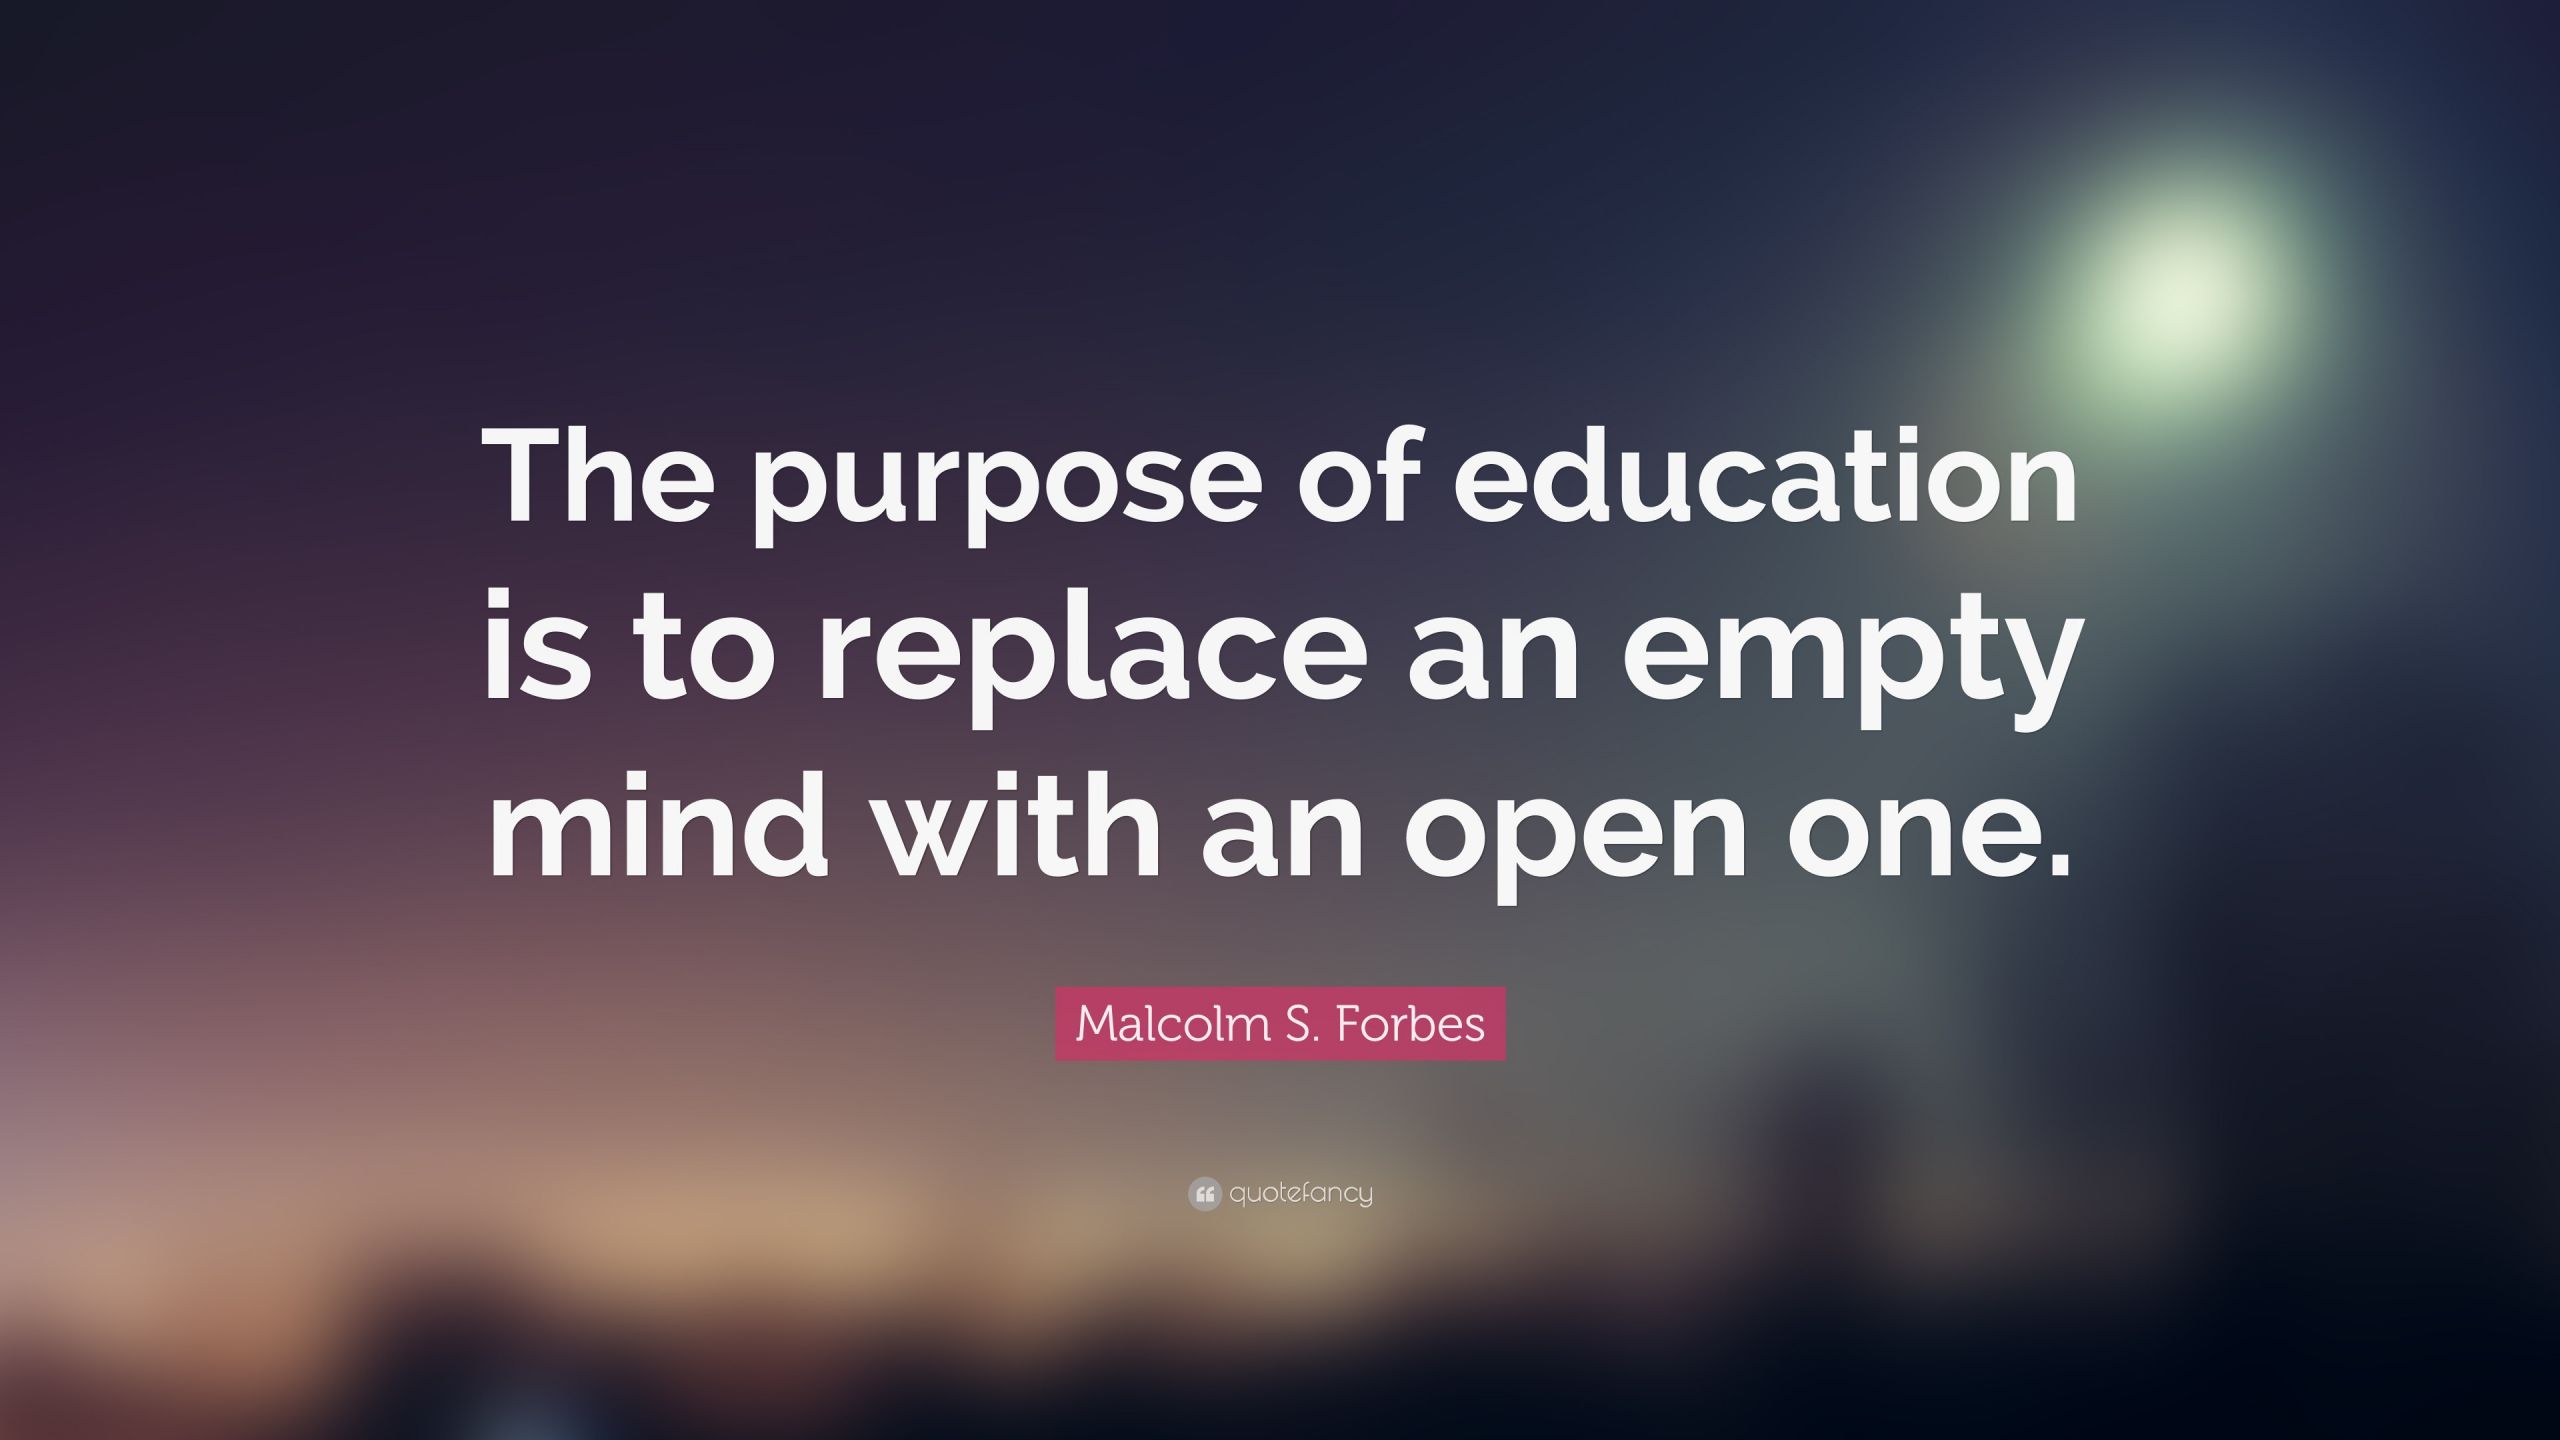 Purpose Of Education Quote
 Malcolm S Forbes Quote “The purpose of education is to